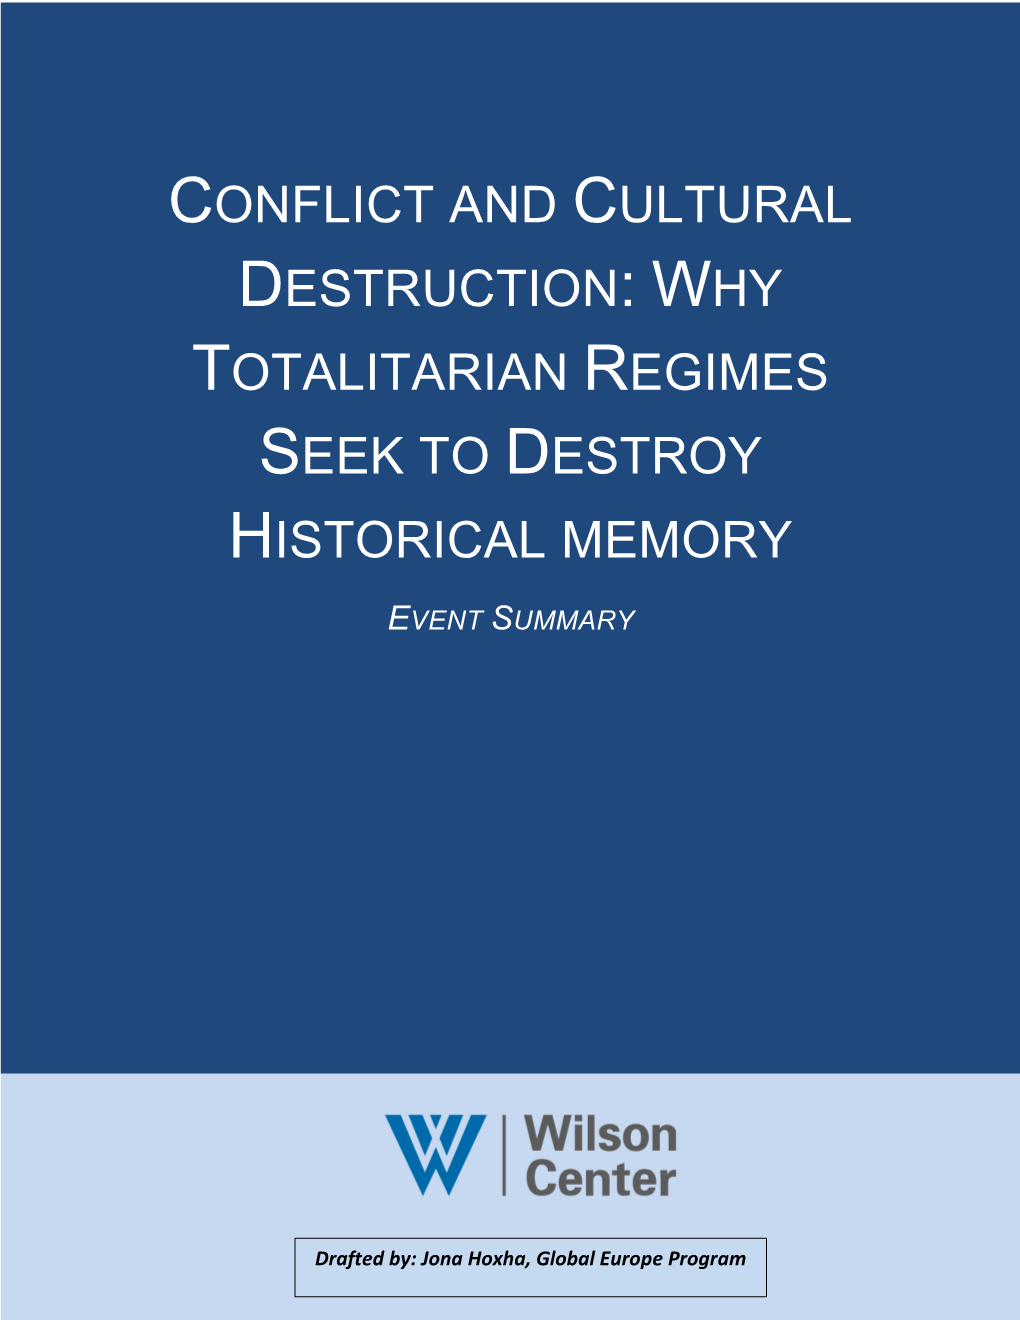 Conflict and Cultural Destruction: Why Totalitarian Regimes Seek to Destroy Historical Memory